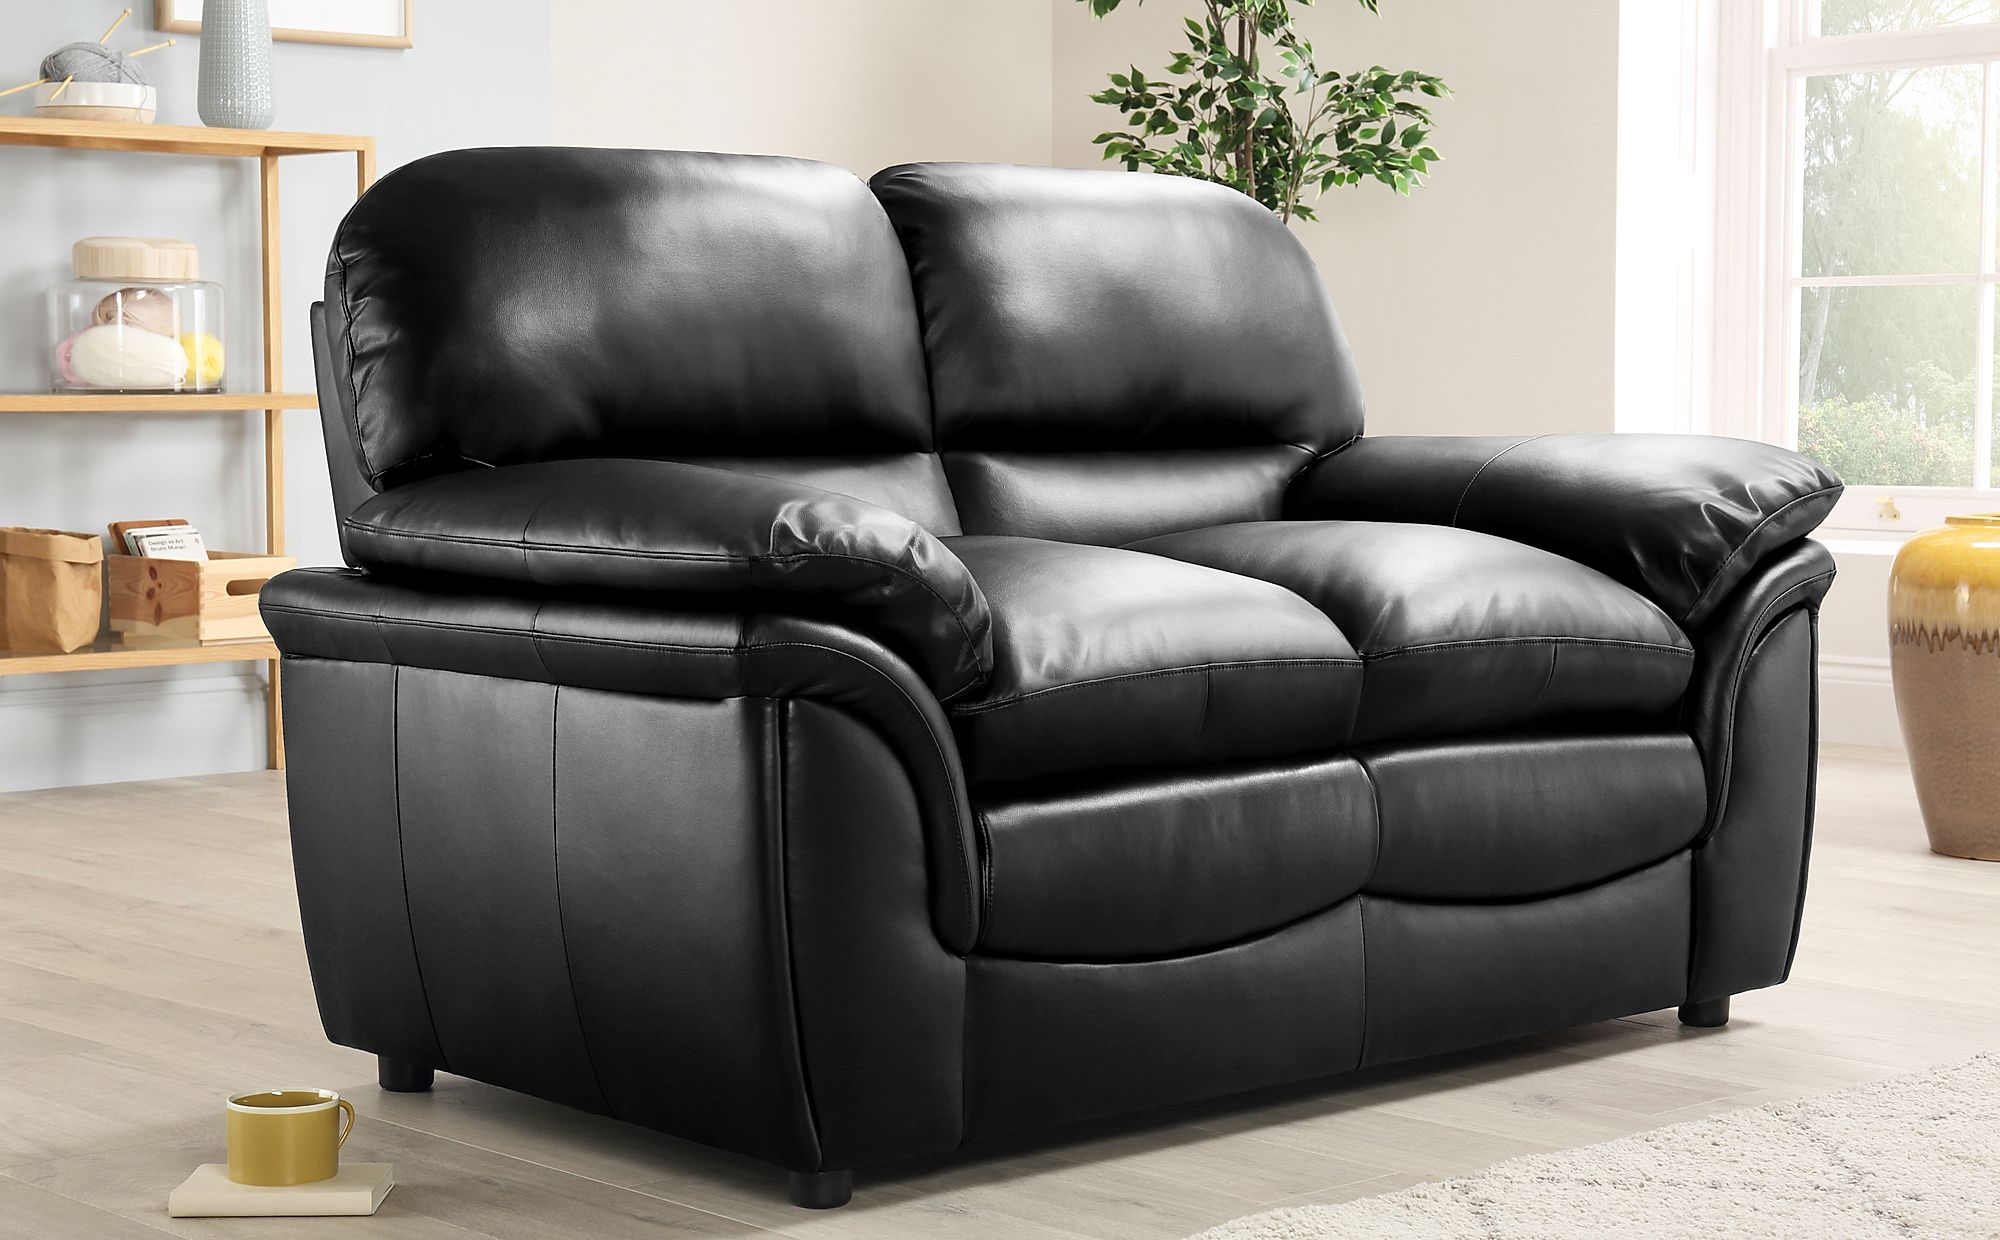 2 seater leather sofa with chaise